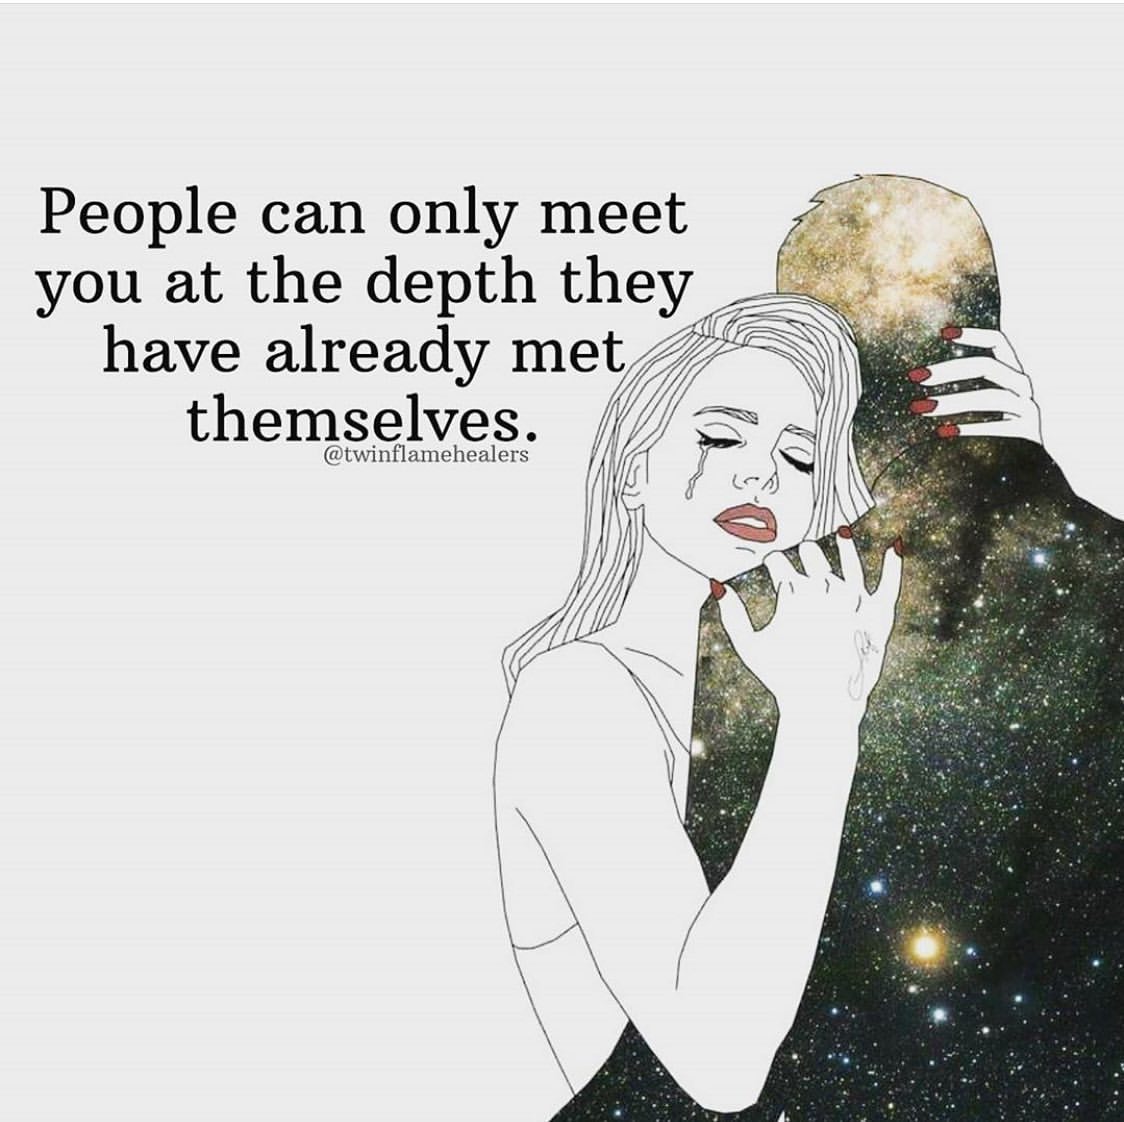 People can only meet you at the depth they have already met themselves.